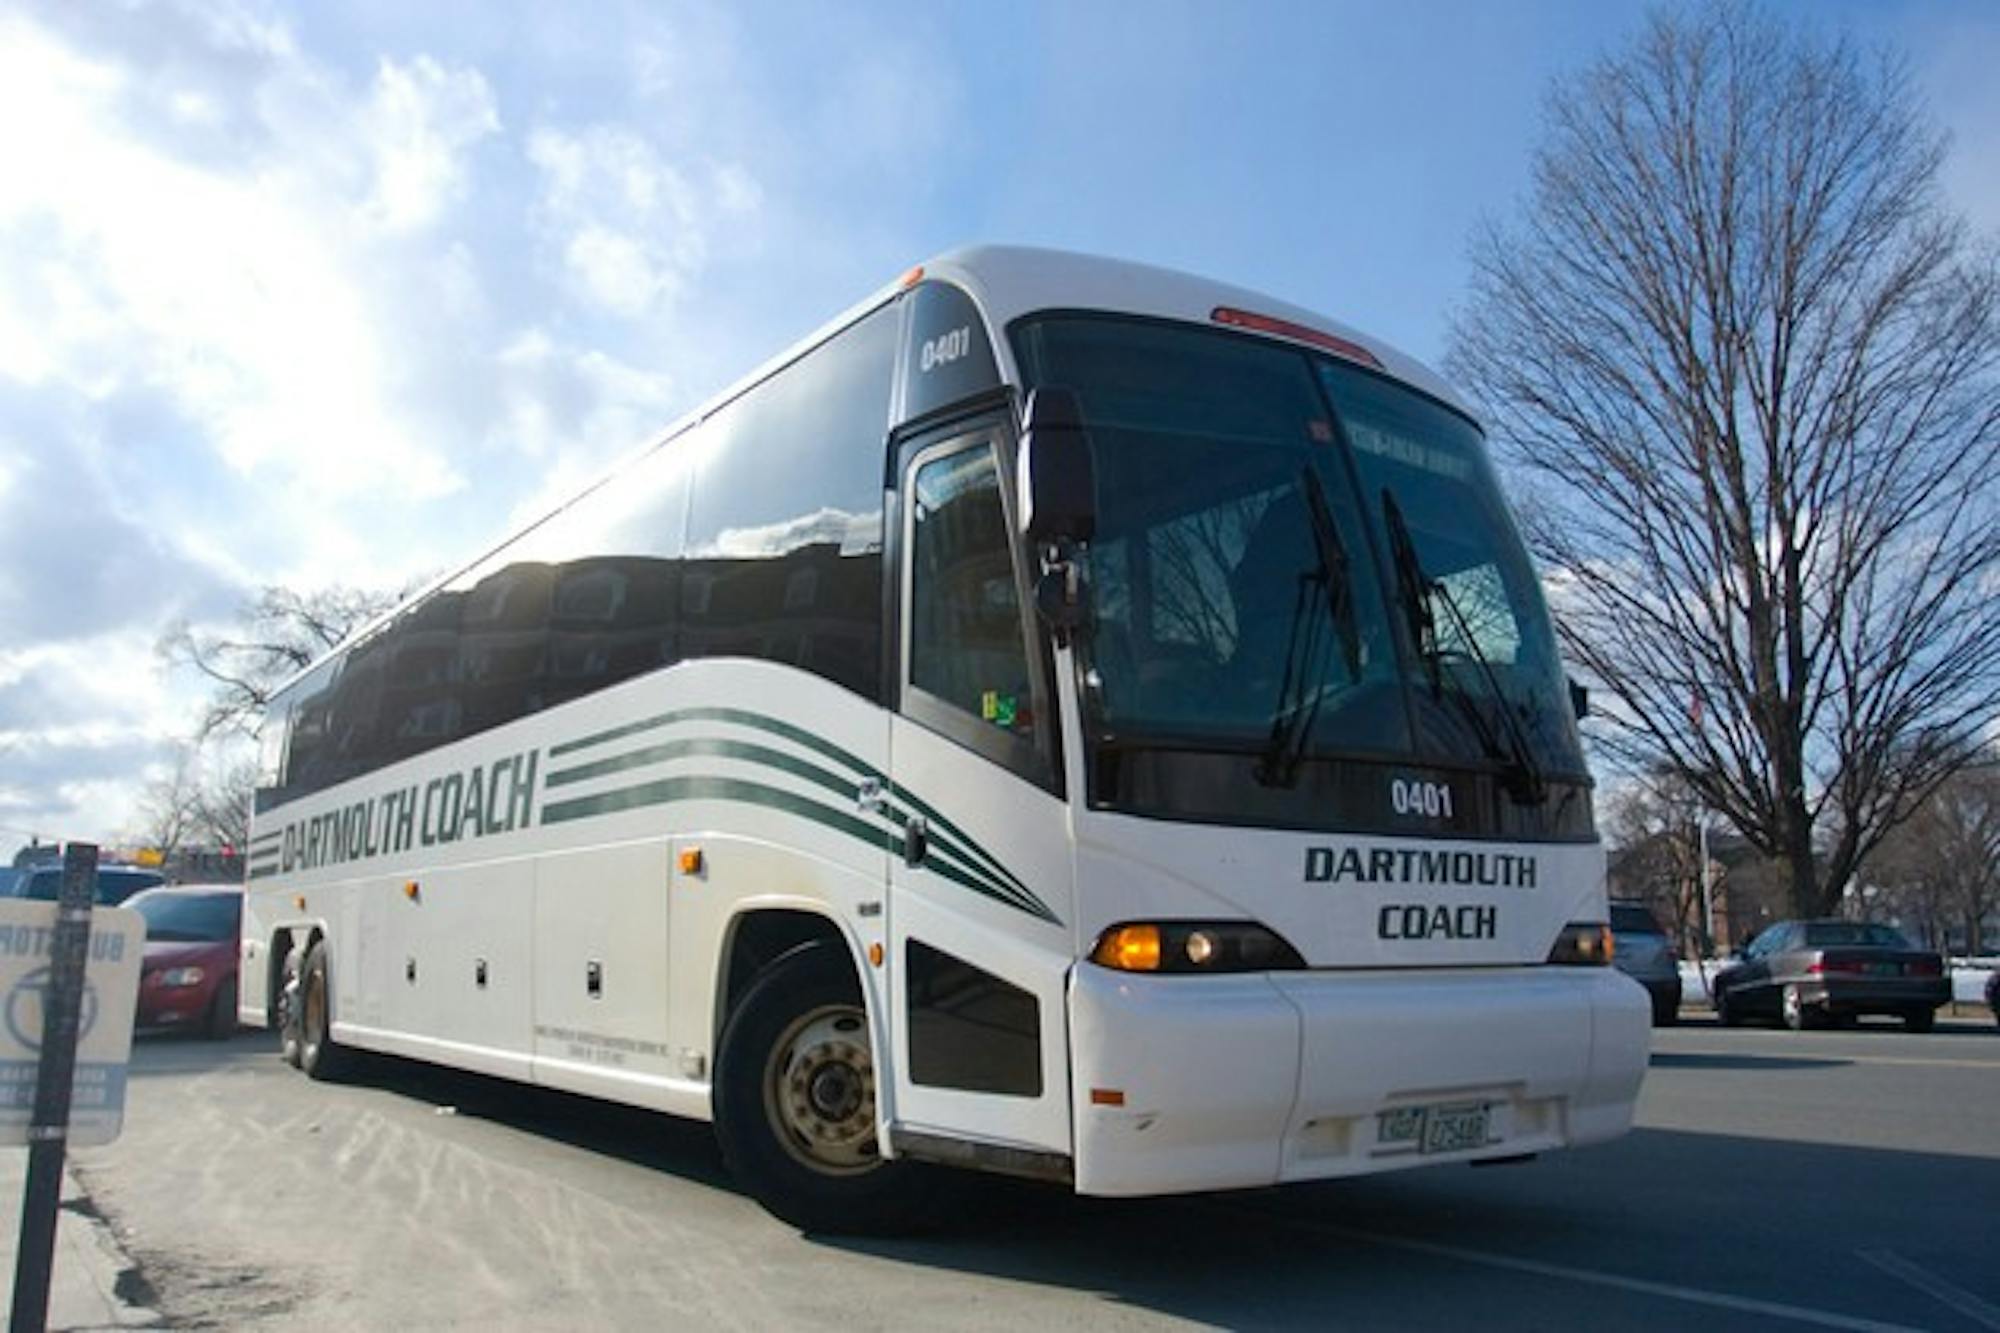 The Dartmouth Coach increases the number of buses that run during the interim to accommodate students leaving from and returning to campus.